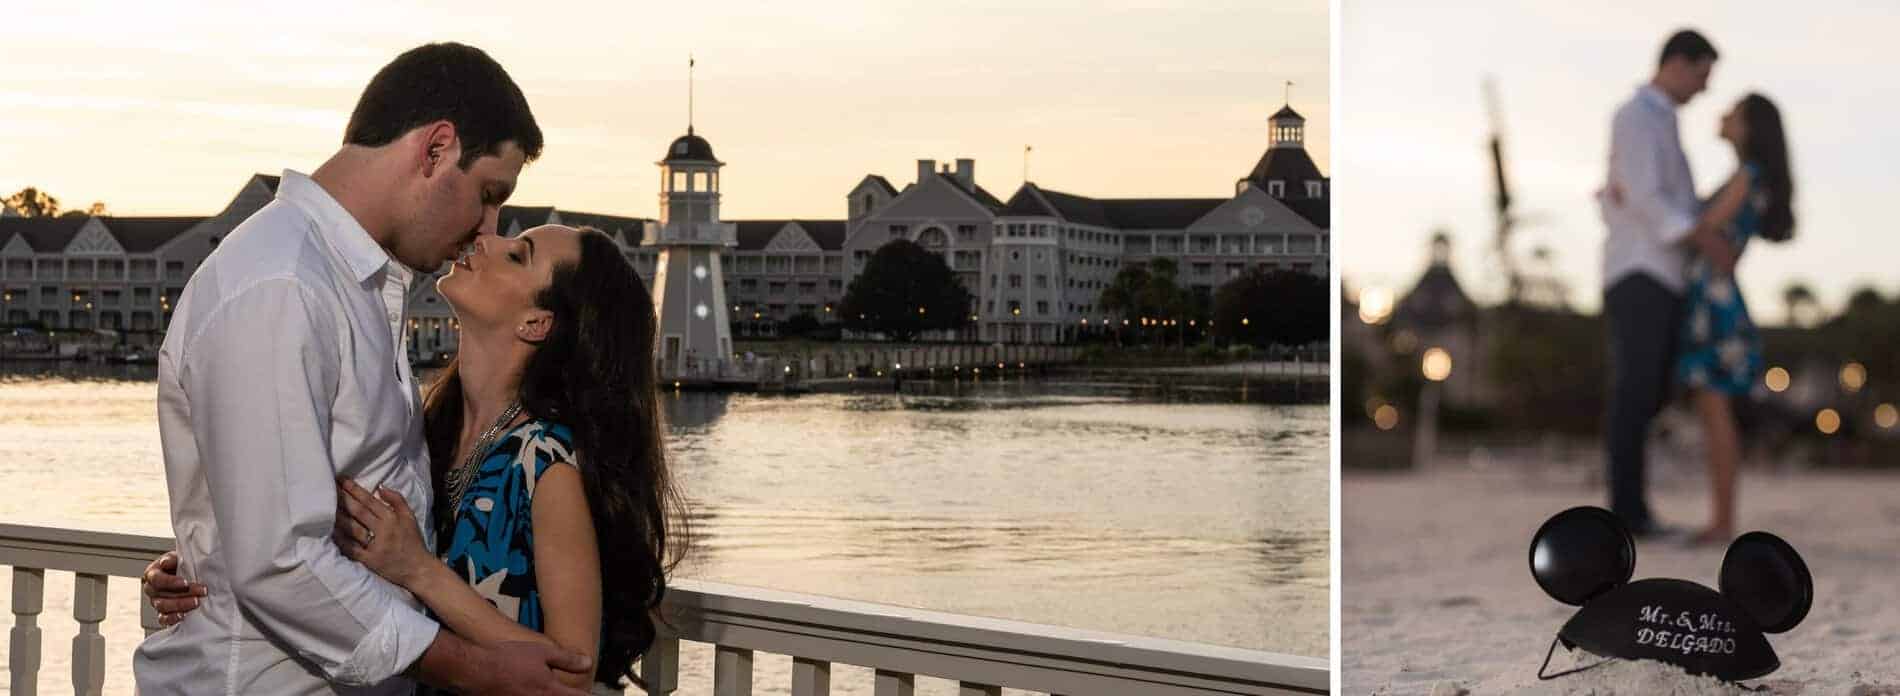 Couple at sunset in front of bay at Disney Boardwalk